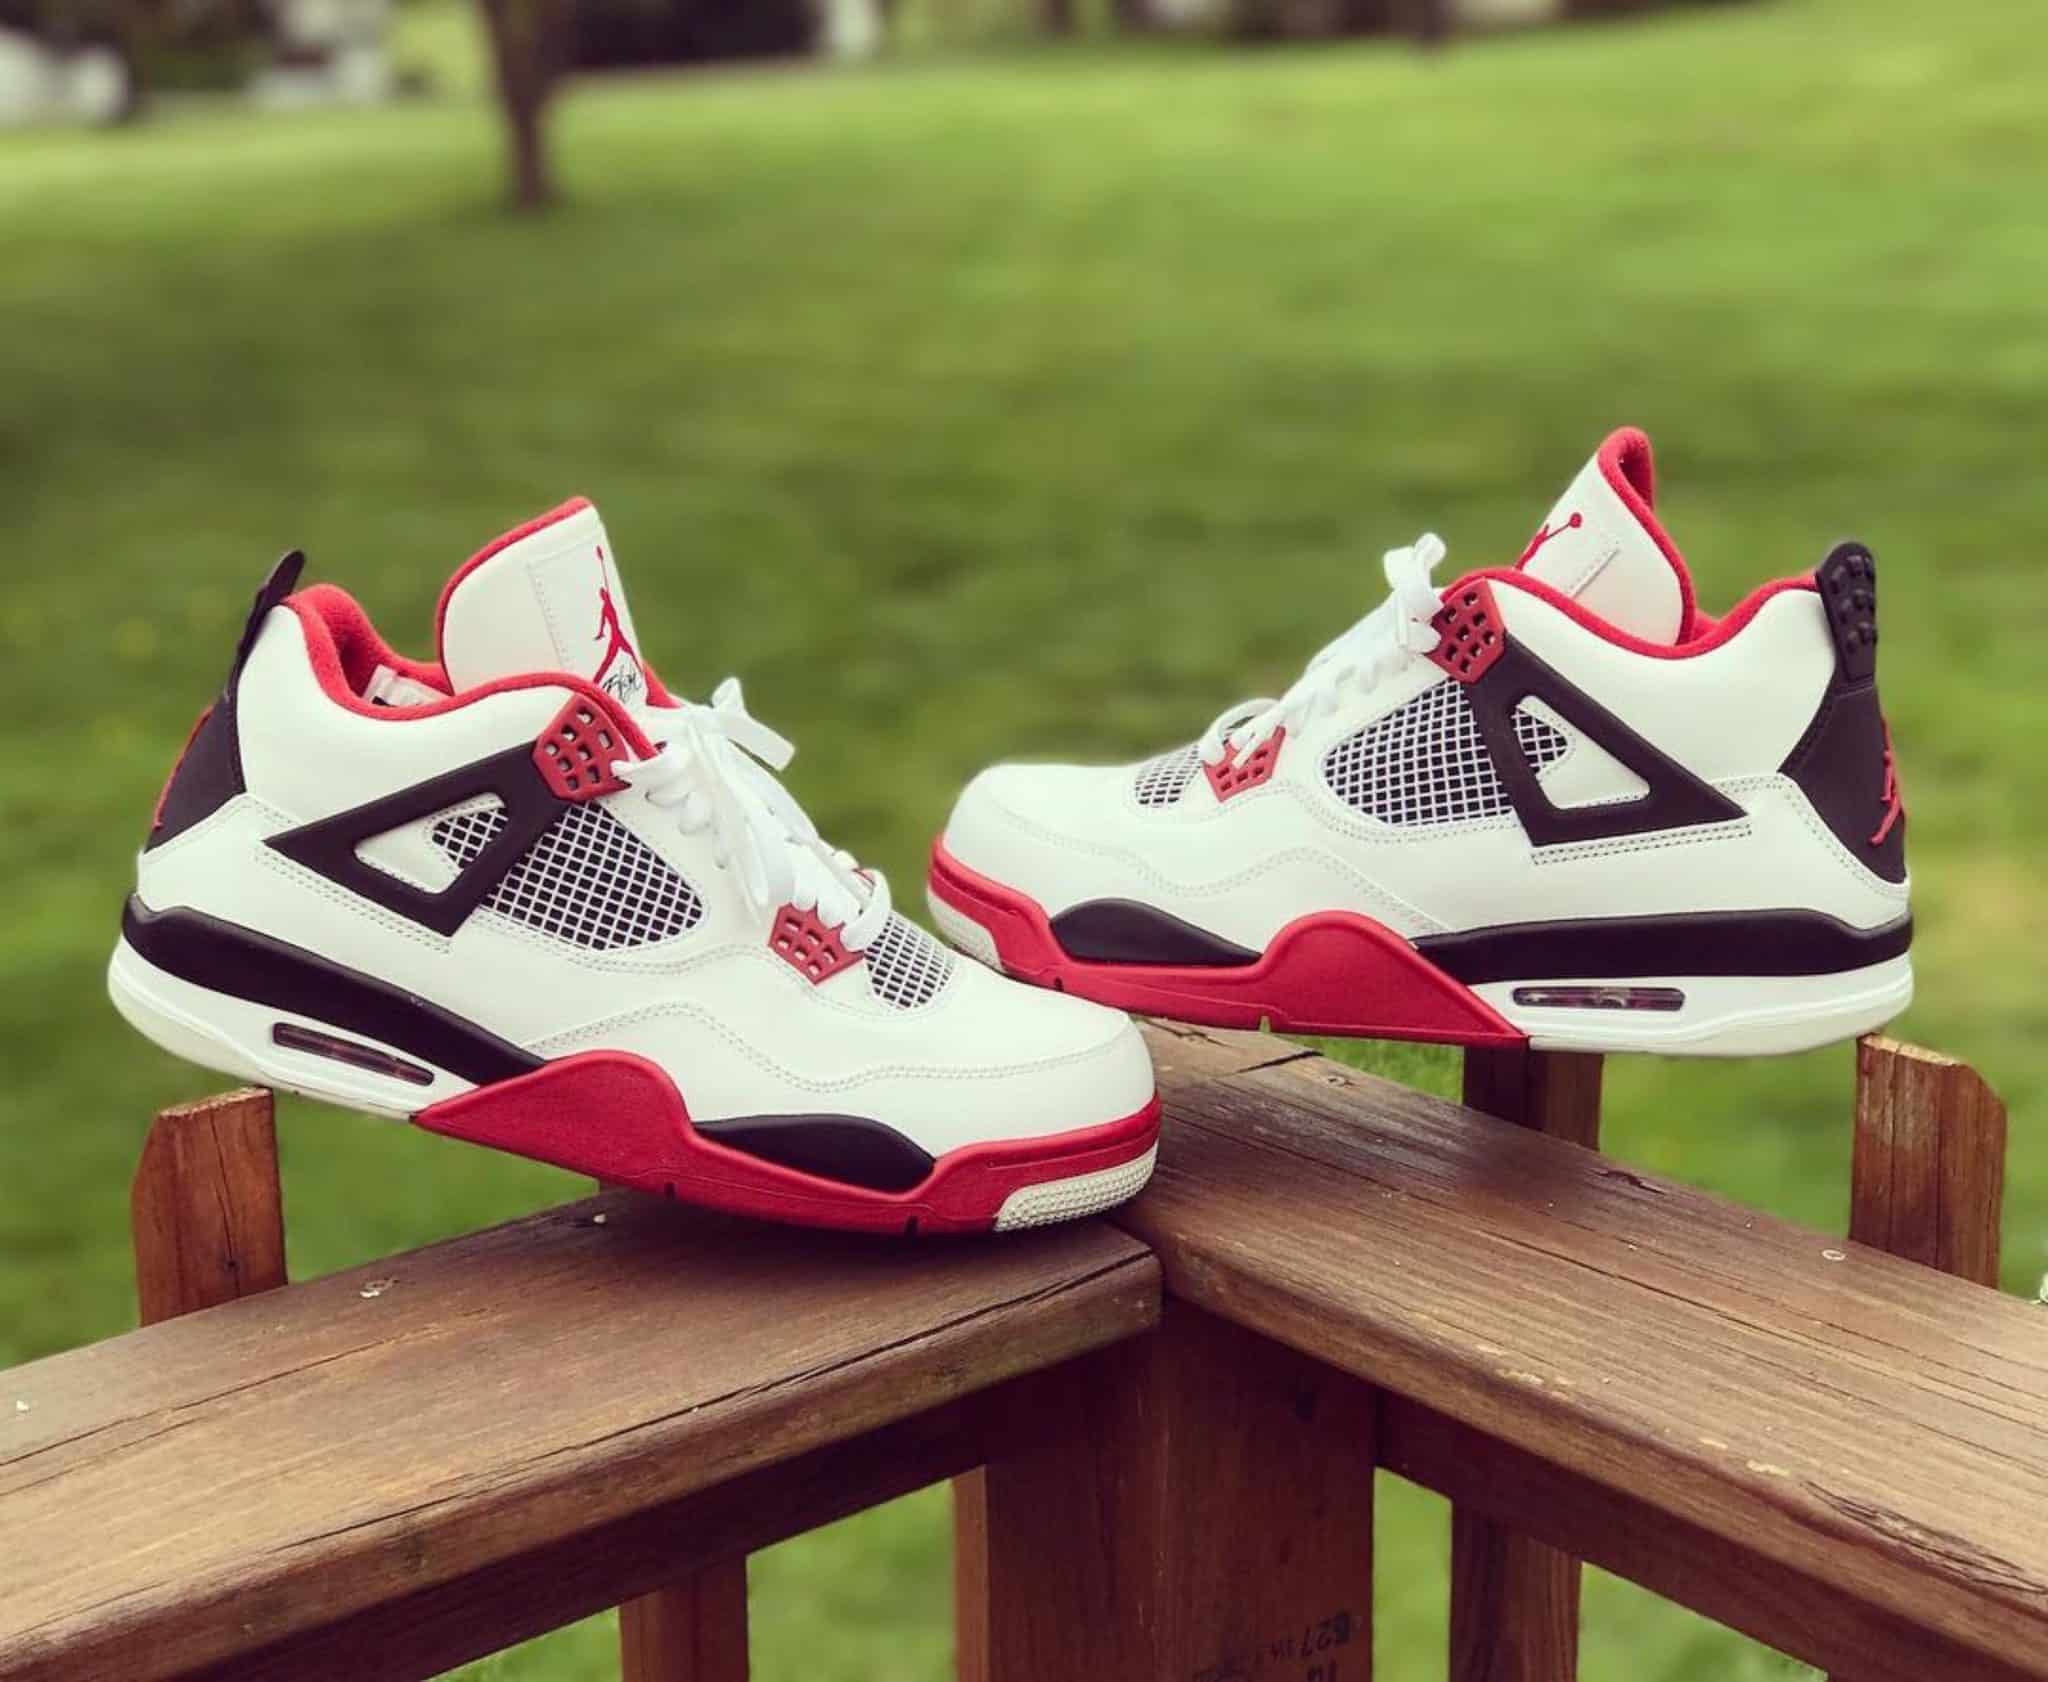 Air Jordan 4 “Fire Red” Will Be Available in Stores at the End of November